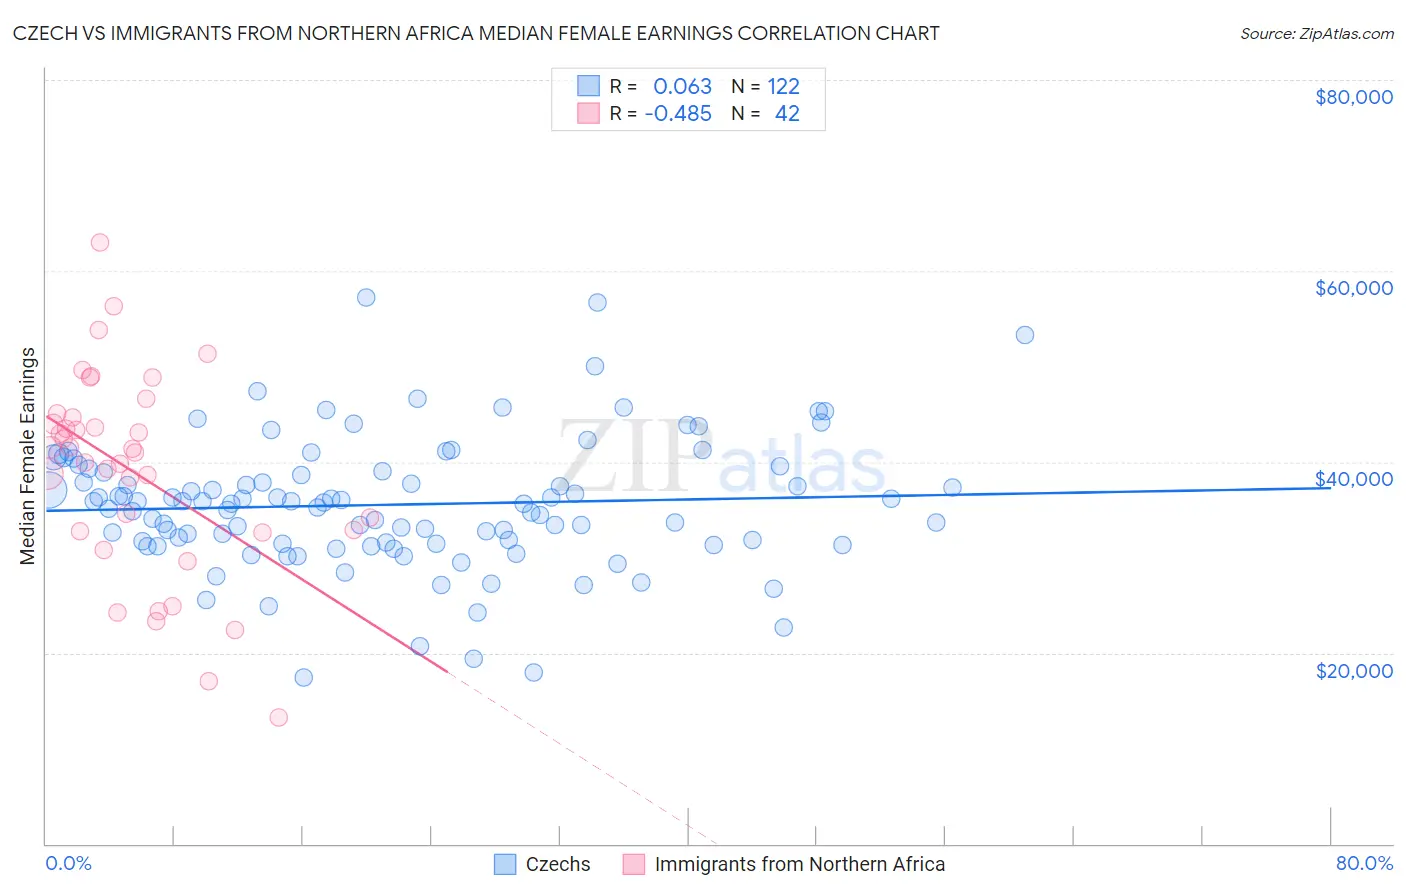 Czech vs Immigrants from Northern Africa Median Female Earnings